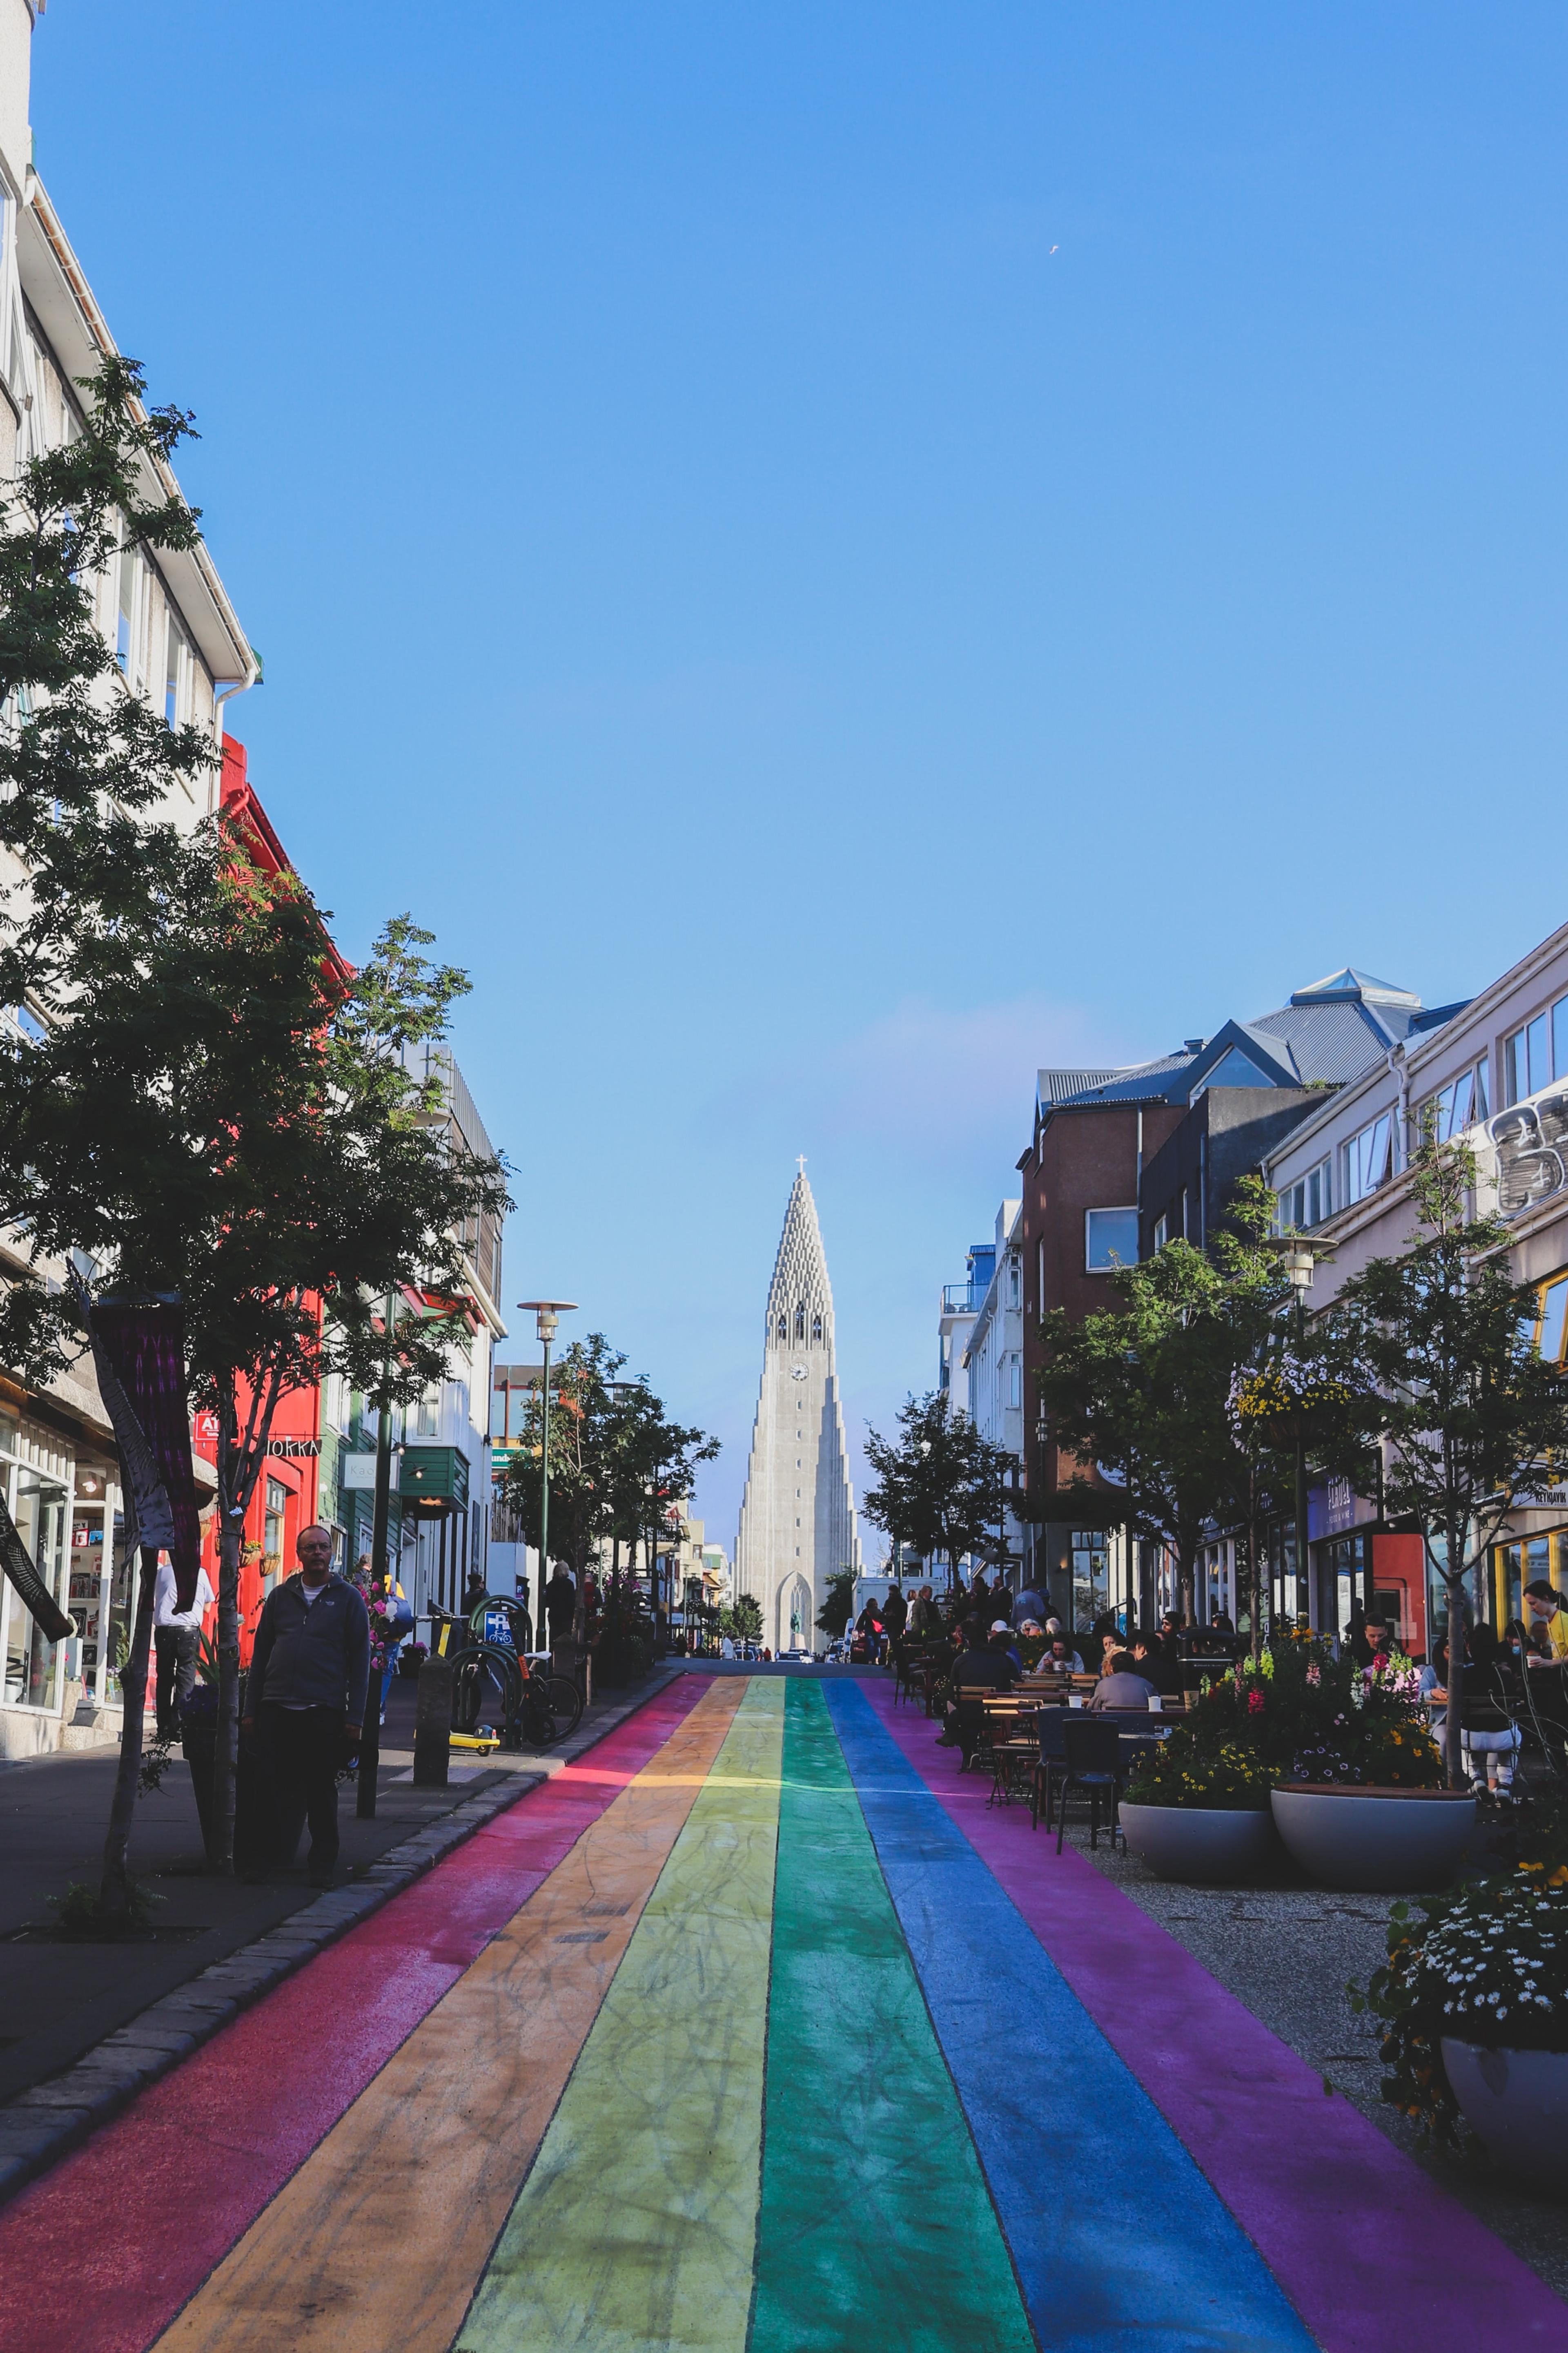 The iconic Rainbow Street in downtown Reykjavík, with the imposing silhouette of Hallgrímskirkja church in the background.